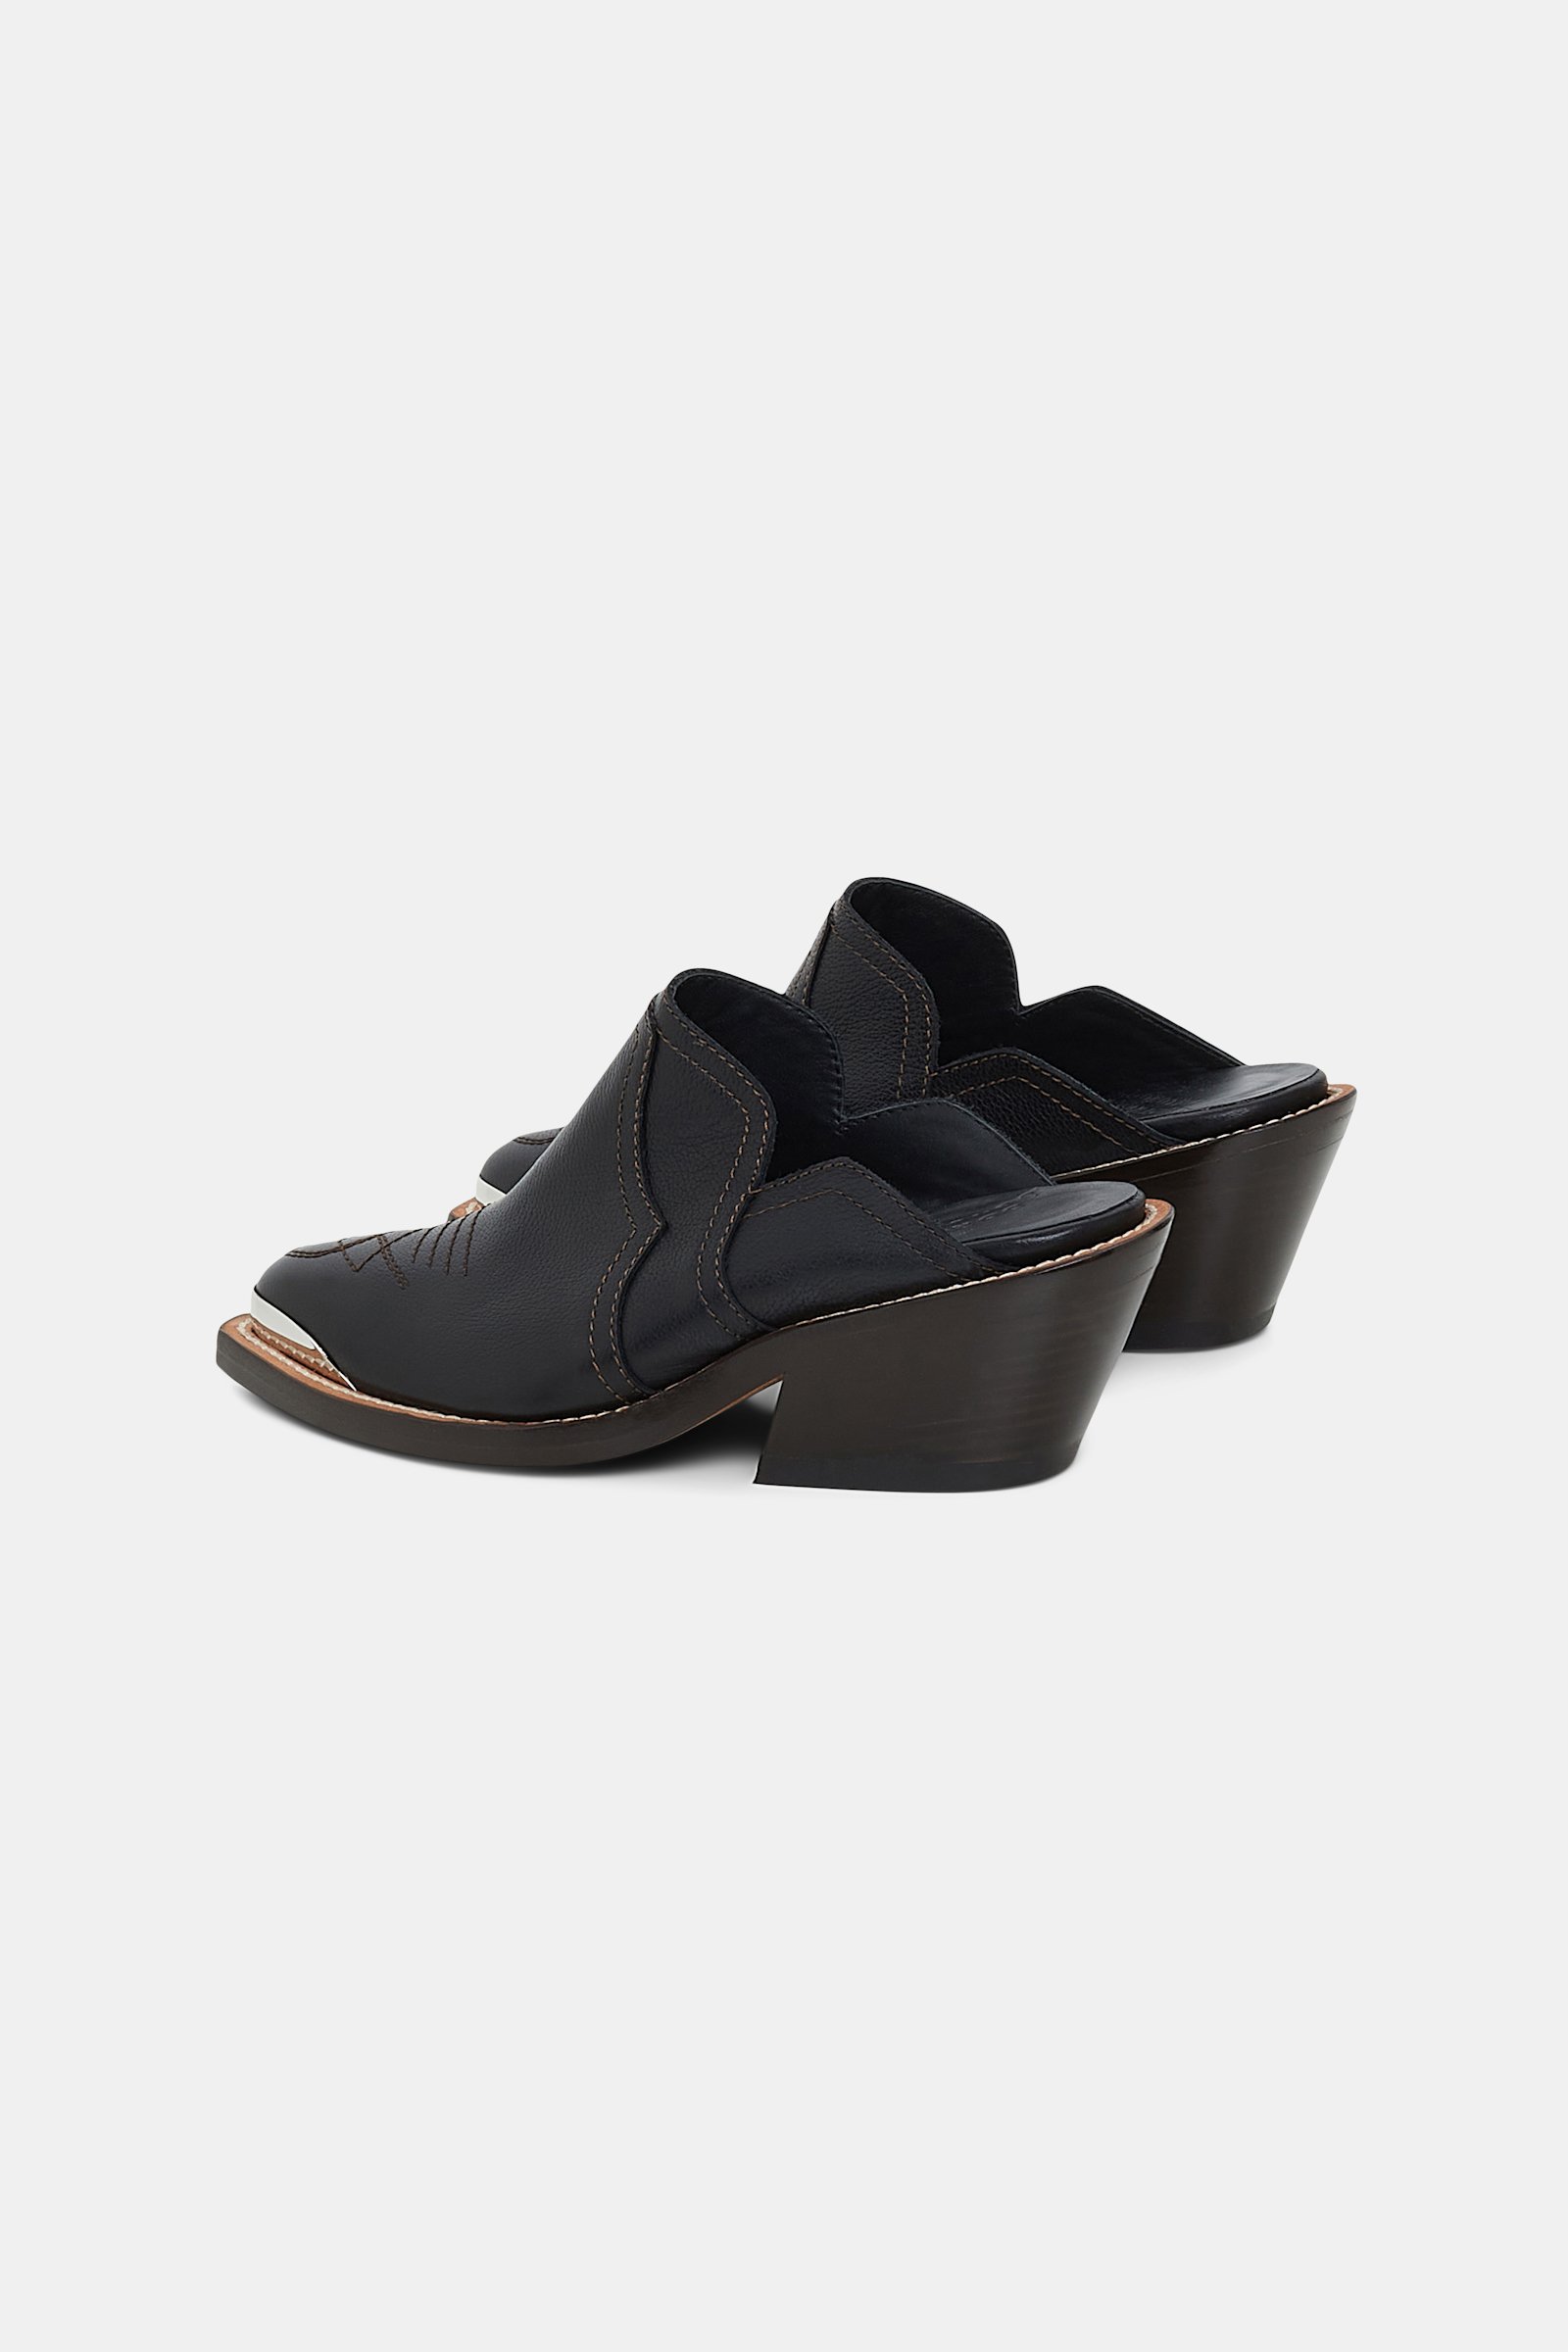 Dorothee Schumacher Western-style mules pure black